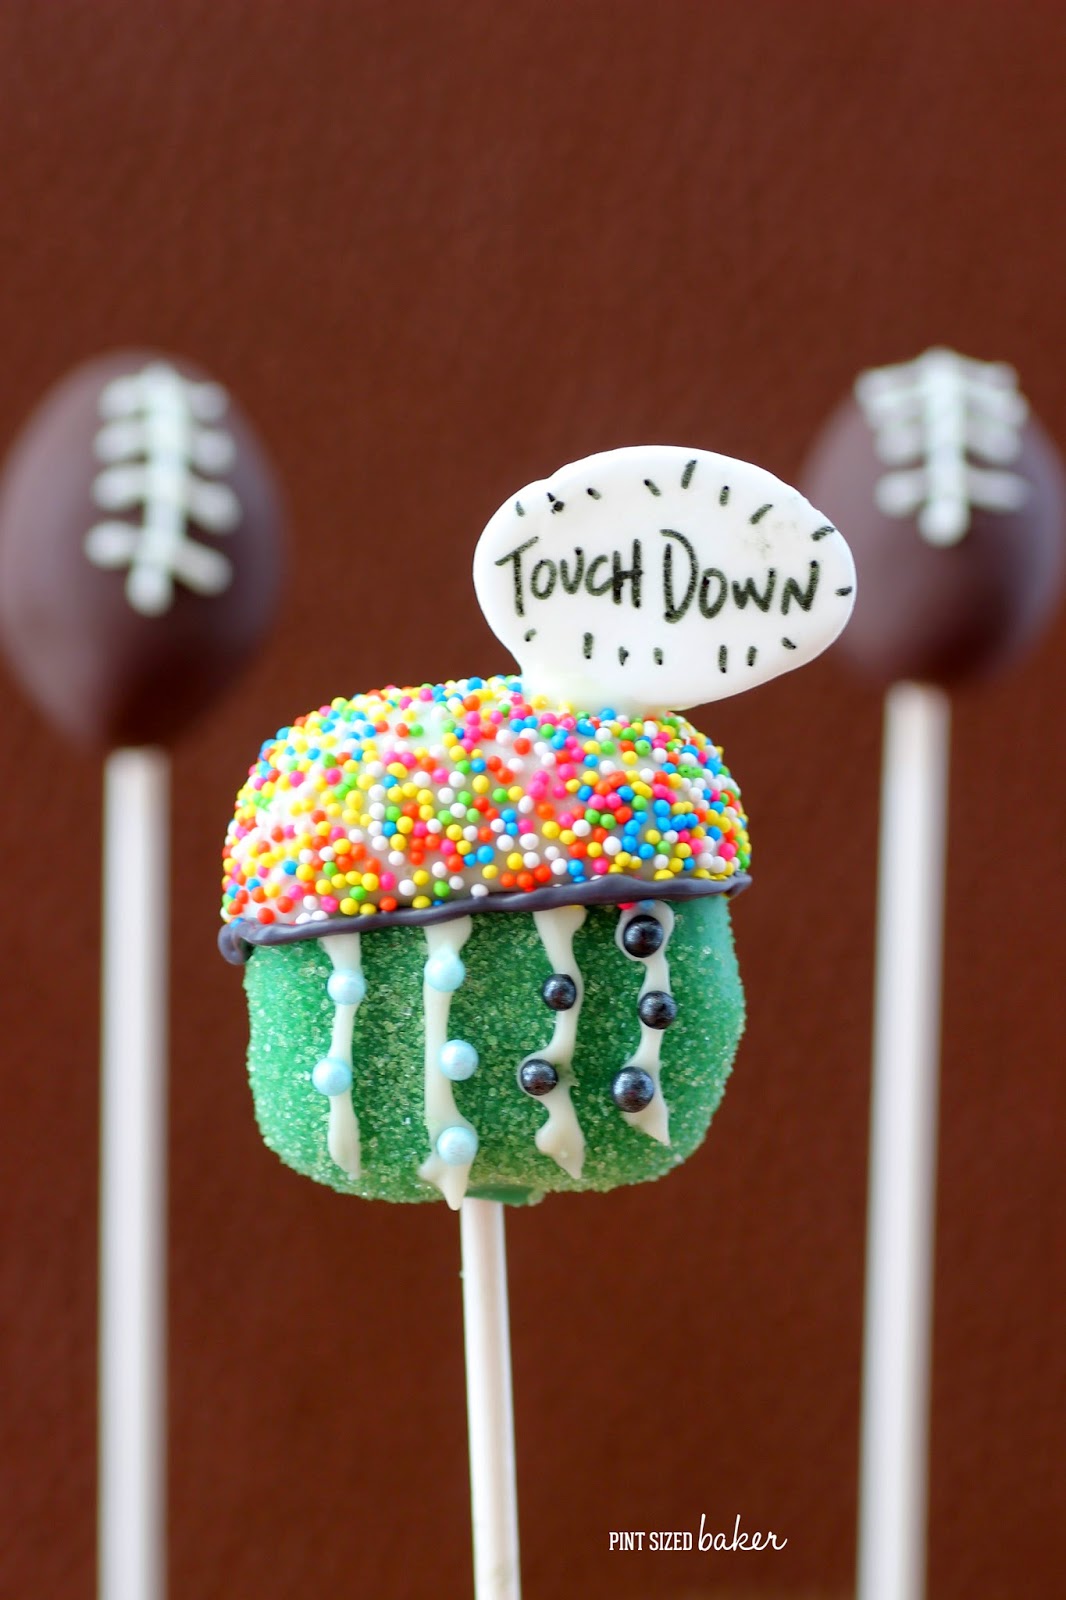 You'll score a touchdown for sure when you make these Stadium Cake Pops for your sports fans!